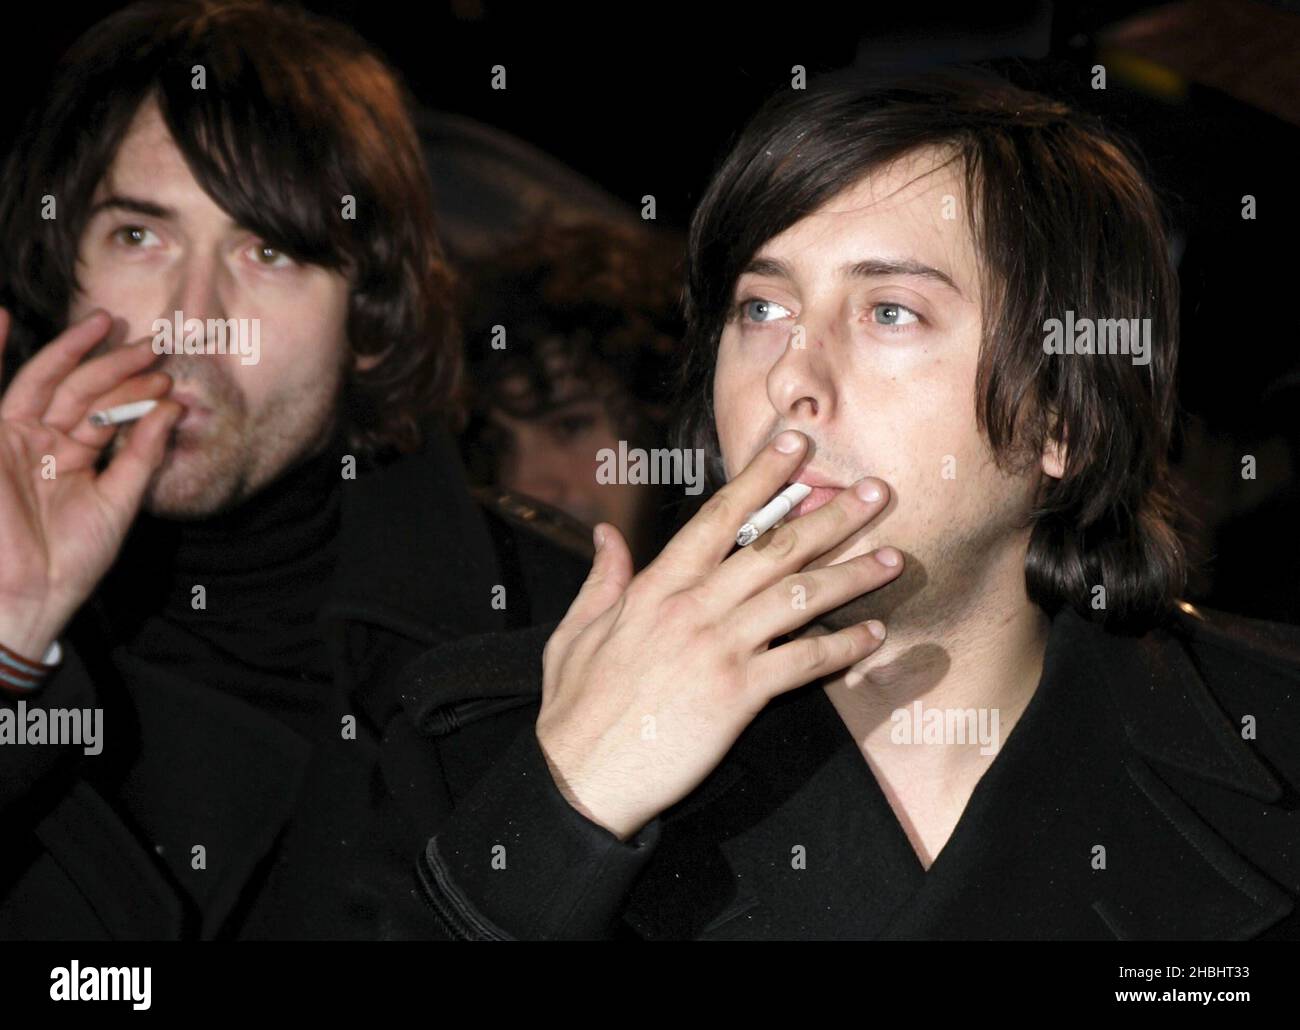 Former Libertines star Carl Barrat with his new band, Dirty Pretty Things arriving at the Shockwaves NME Awards 2006, at the Hammersmith Palais in London. Stock Photo